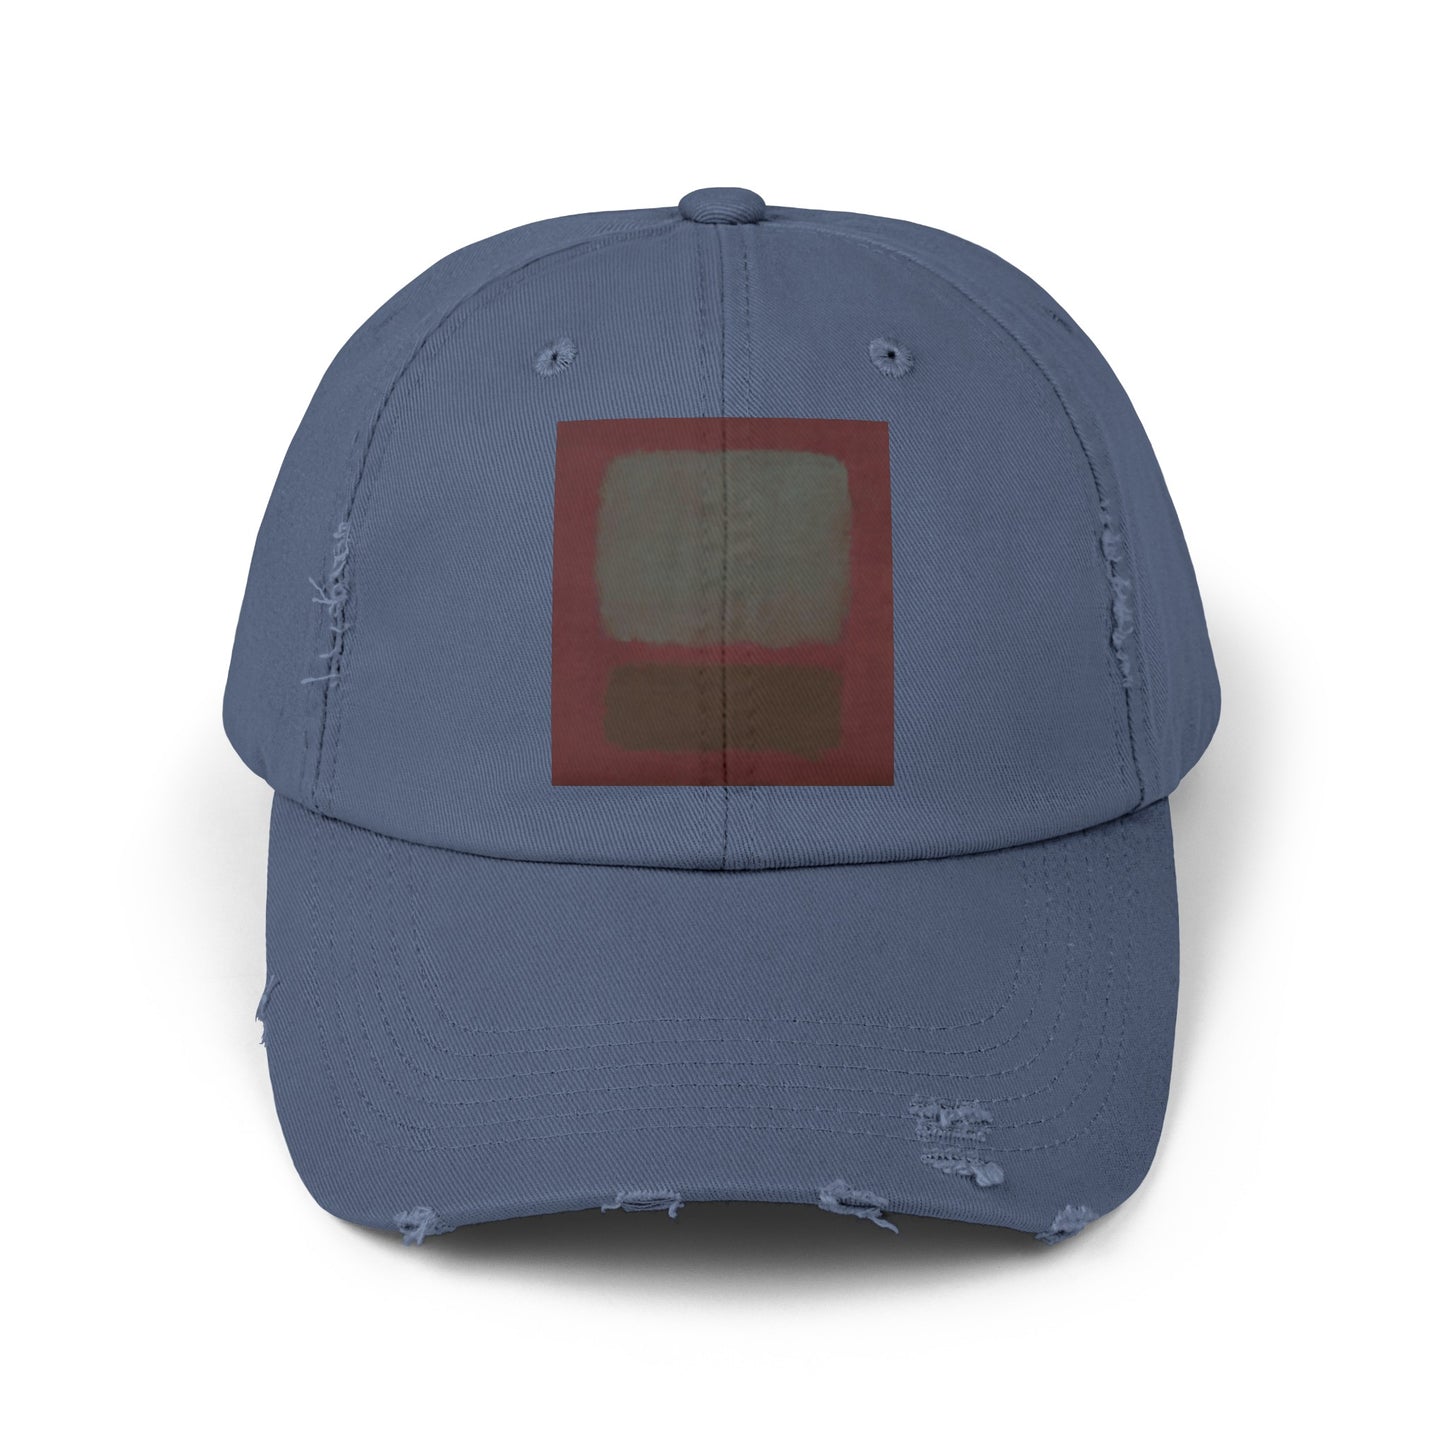 a blue hat with a red square on it